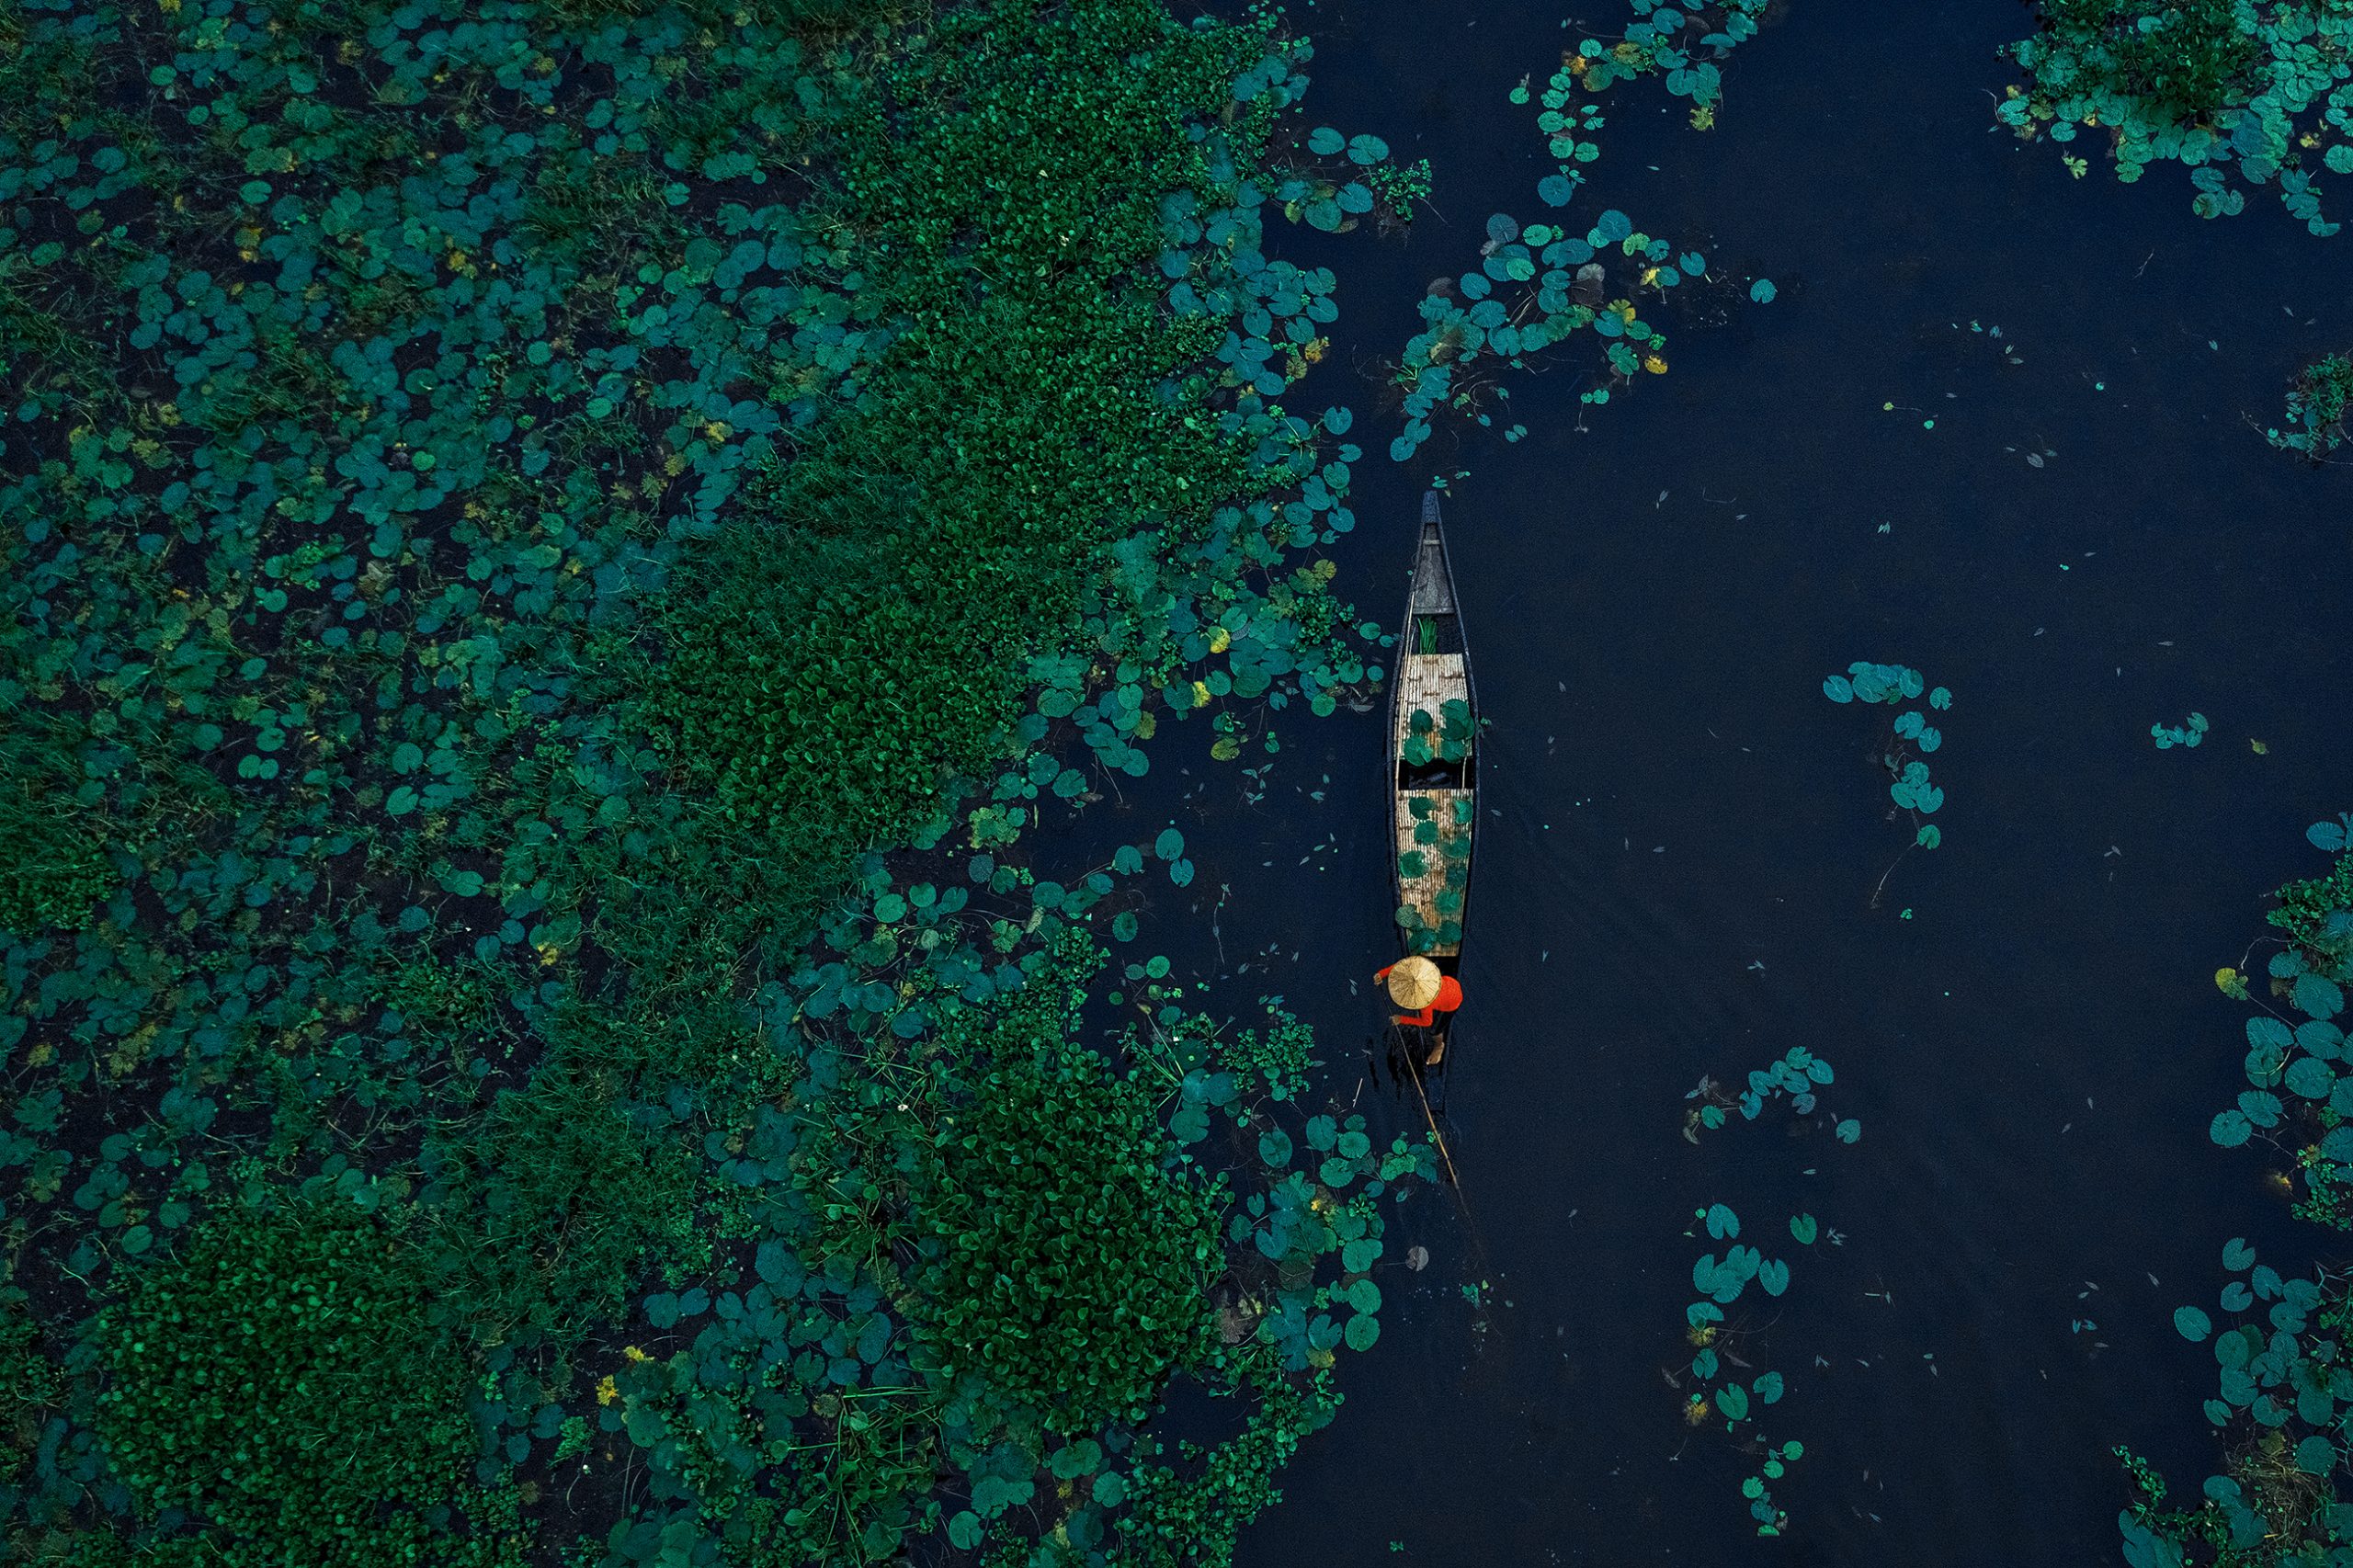 A boat in a lake